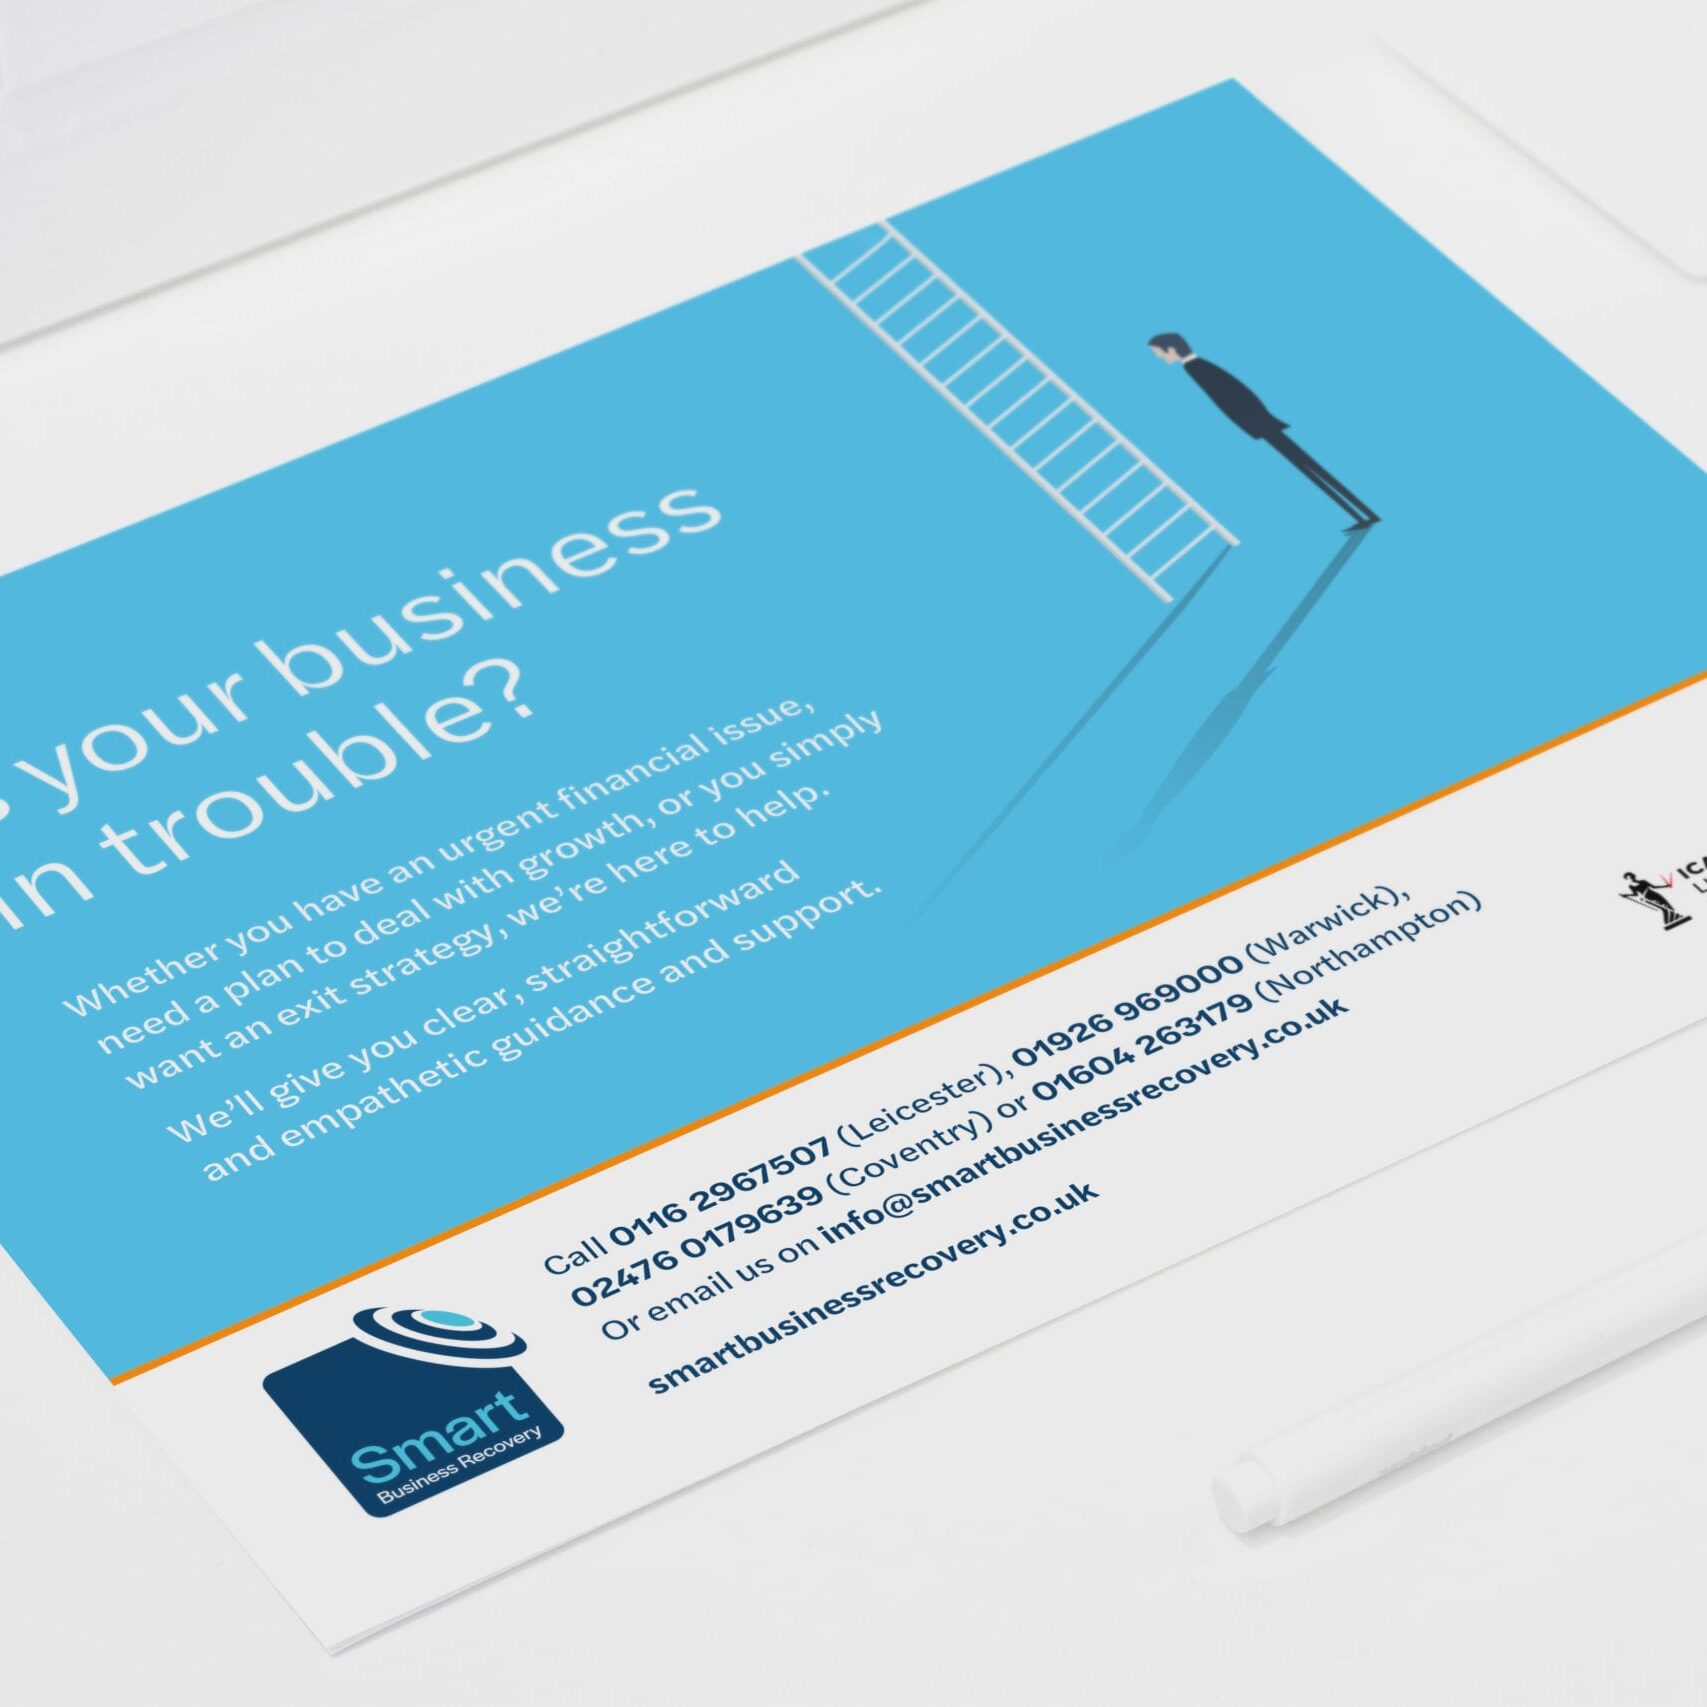 Print advert design for Smart Business Recovery